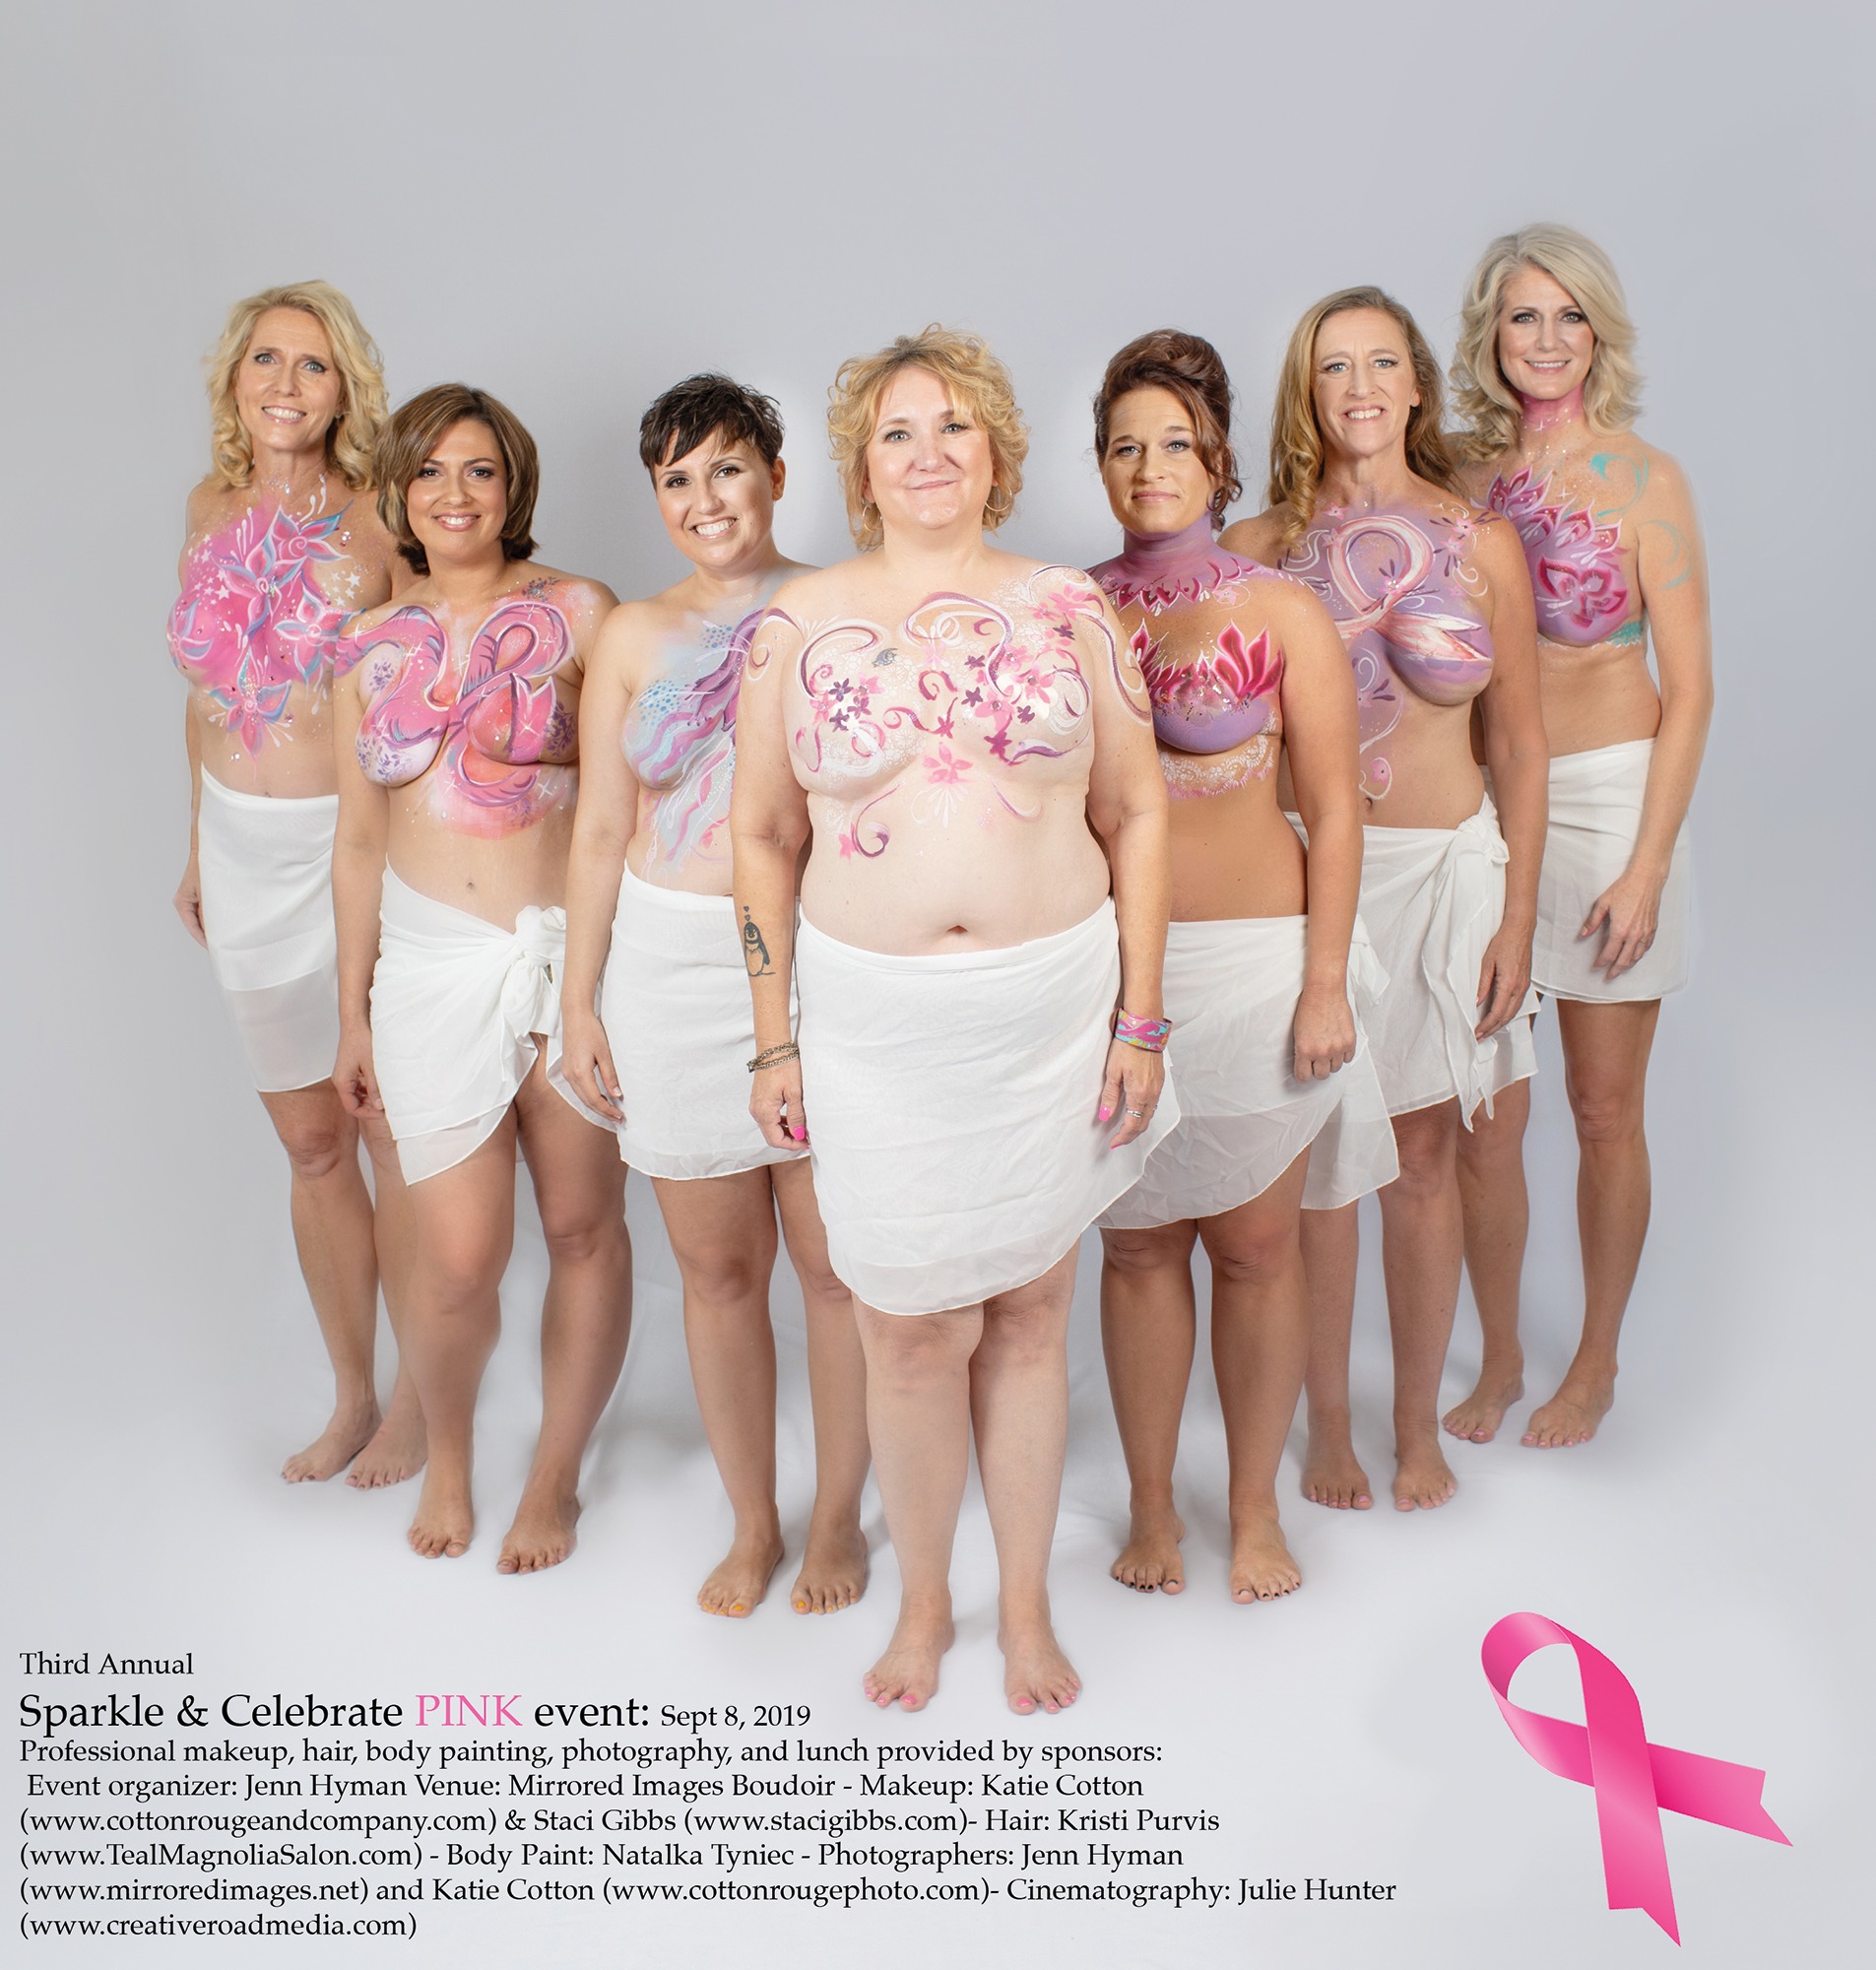 breast cancer event, breast cancer, cancer, survivor, mastectomy, breast reconstruction, atlanta, cancer event, free event, volunteer, susan g komen, body paint, glitter, self love, body positive, embrace your scars